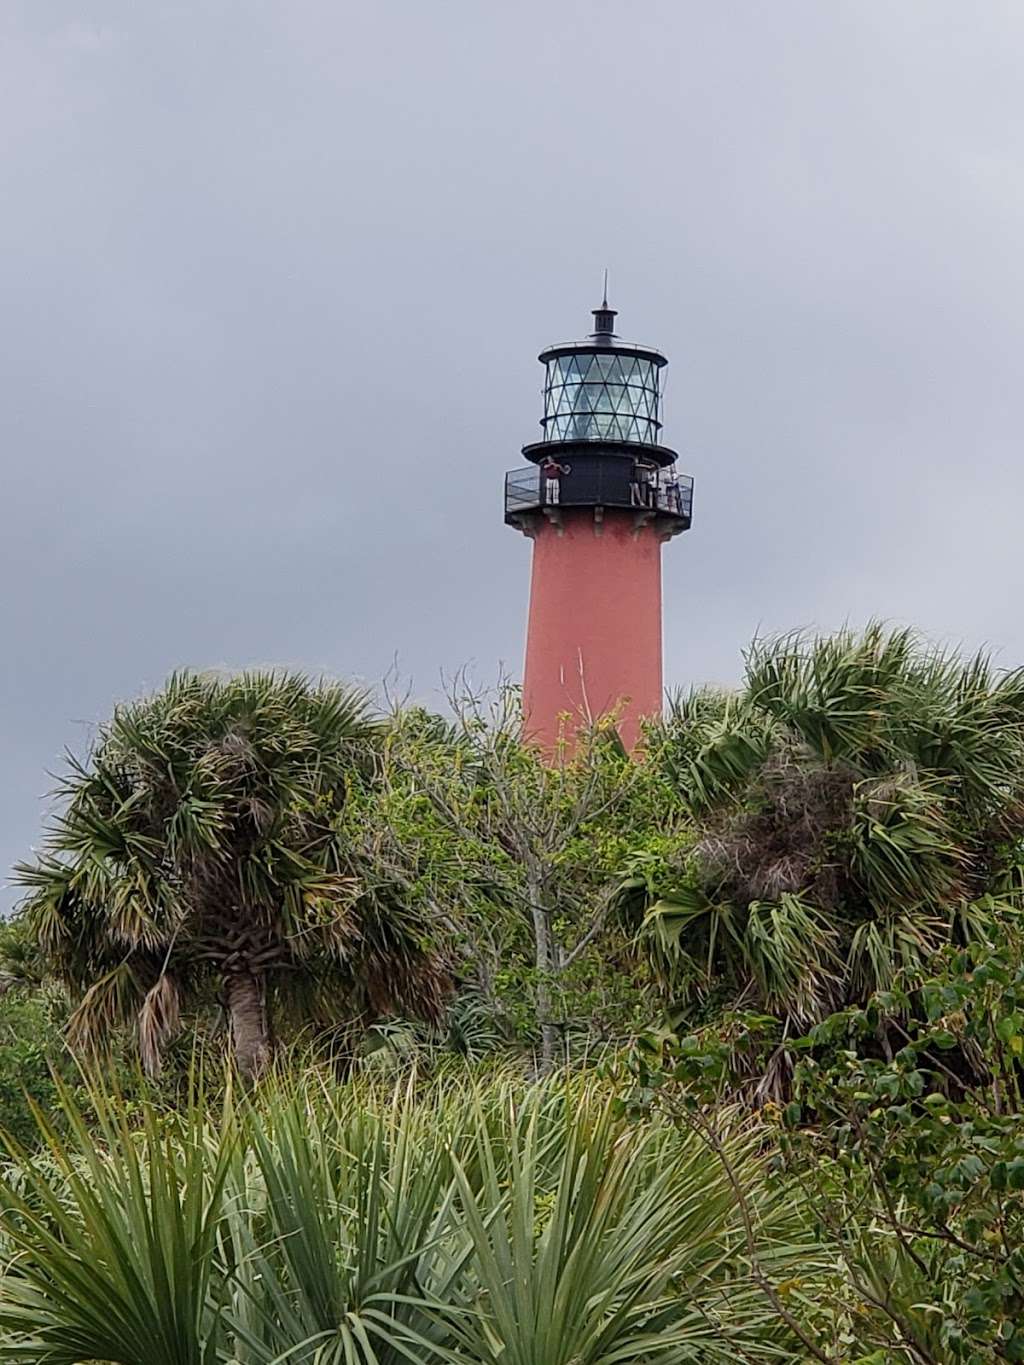 Jupiter Inlet Lighthouse Outstanding Natural Area | 600 County Hwy 707, Tequesta, FL 33469, USA | Phone: (561) 295-5953